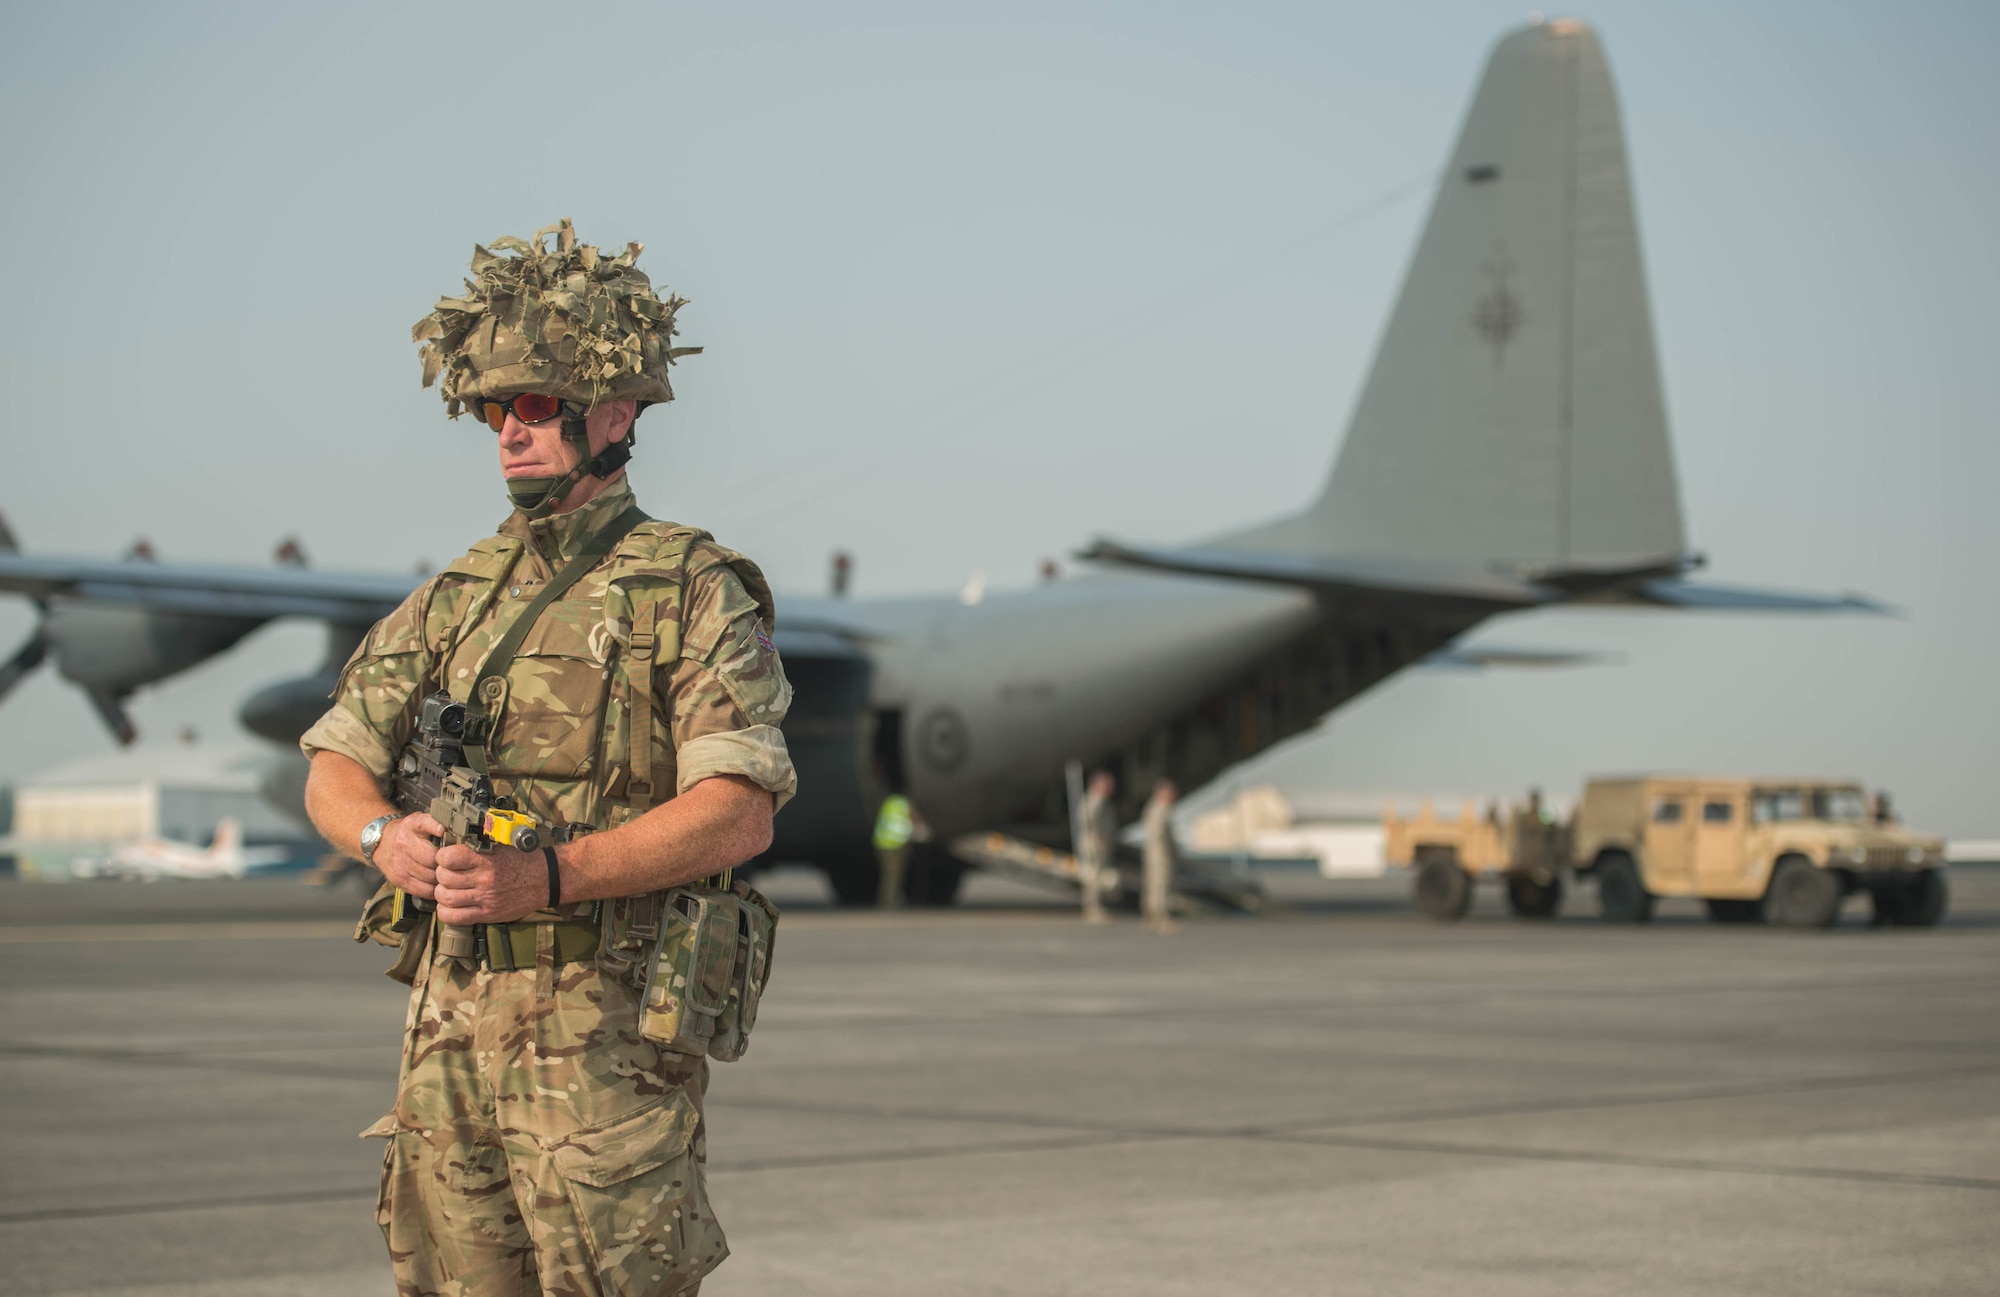 Royal Air Force aircraftsman in full uniform for exercise is standing on the flightline